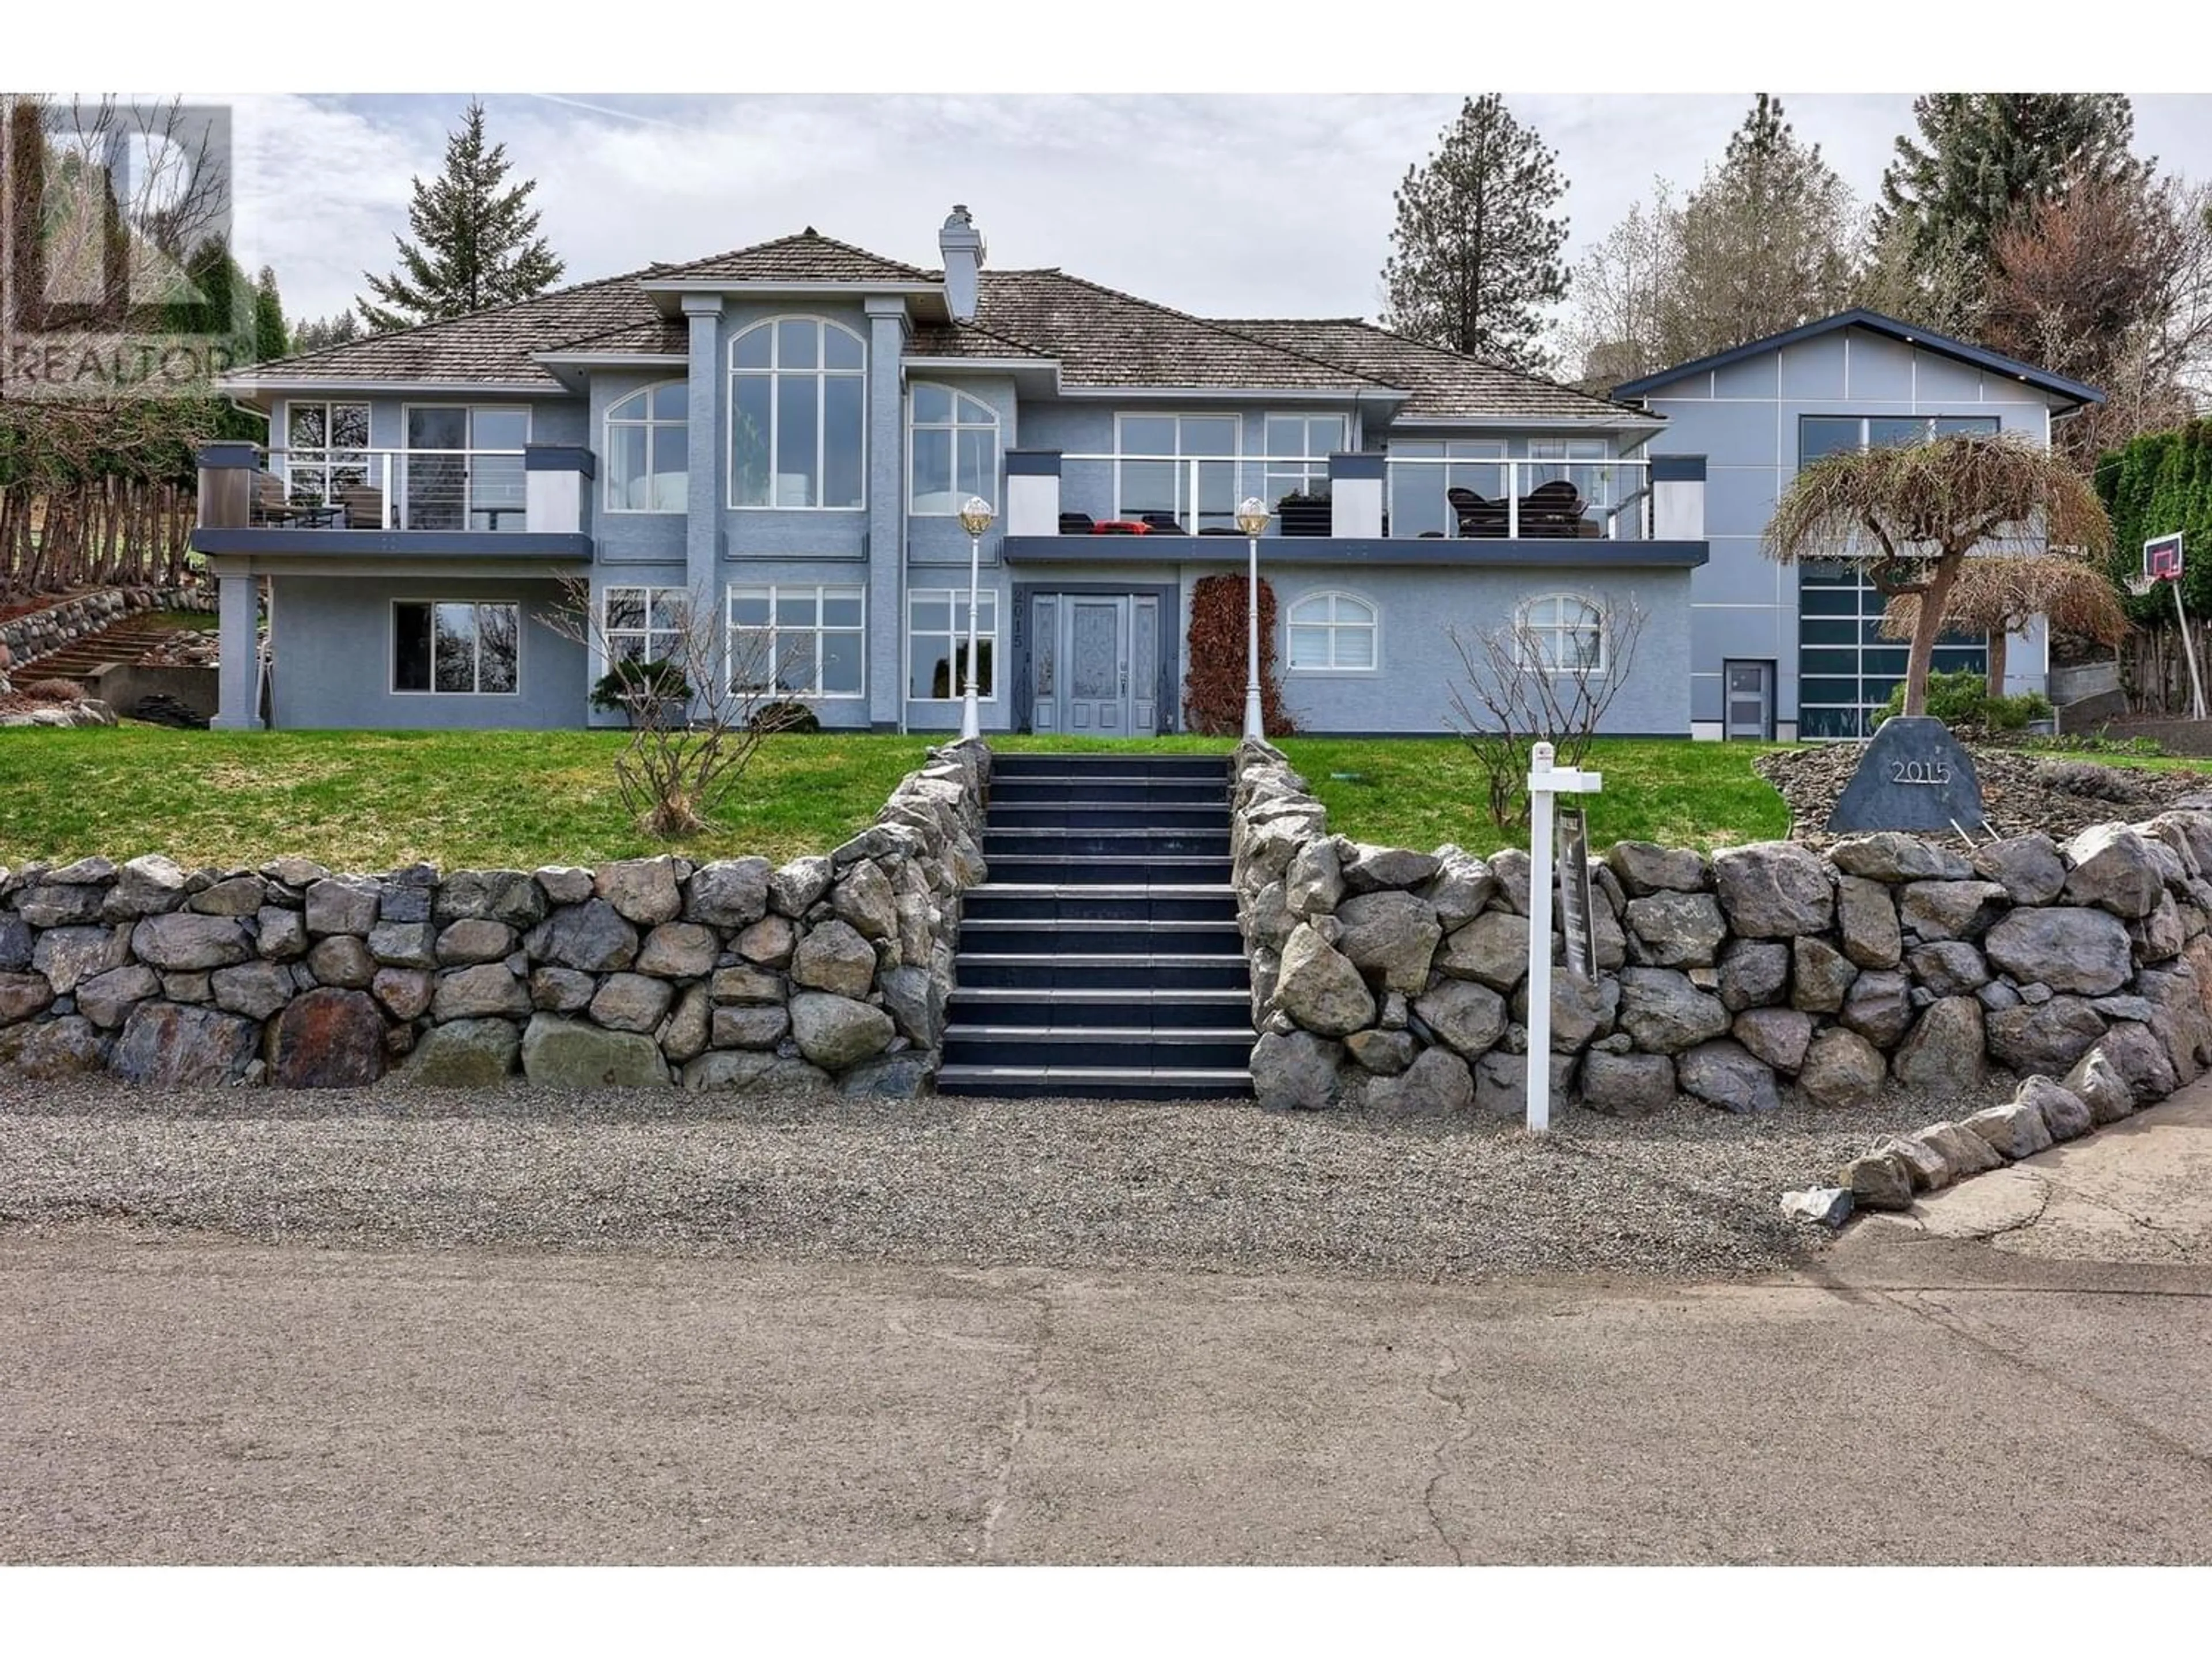 Frontside or backside of a home for 2015 HIGH COUNTRY BLVD, Kamloops British Columbia V2E1L2